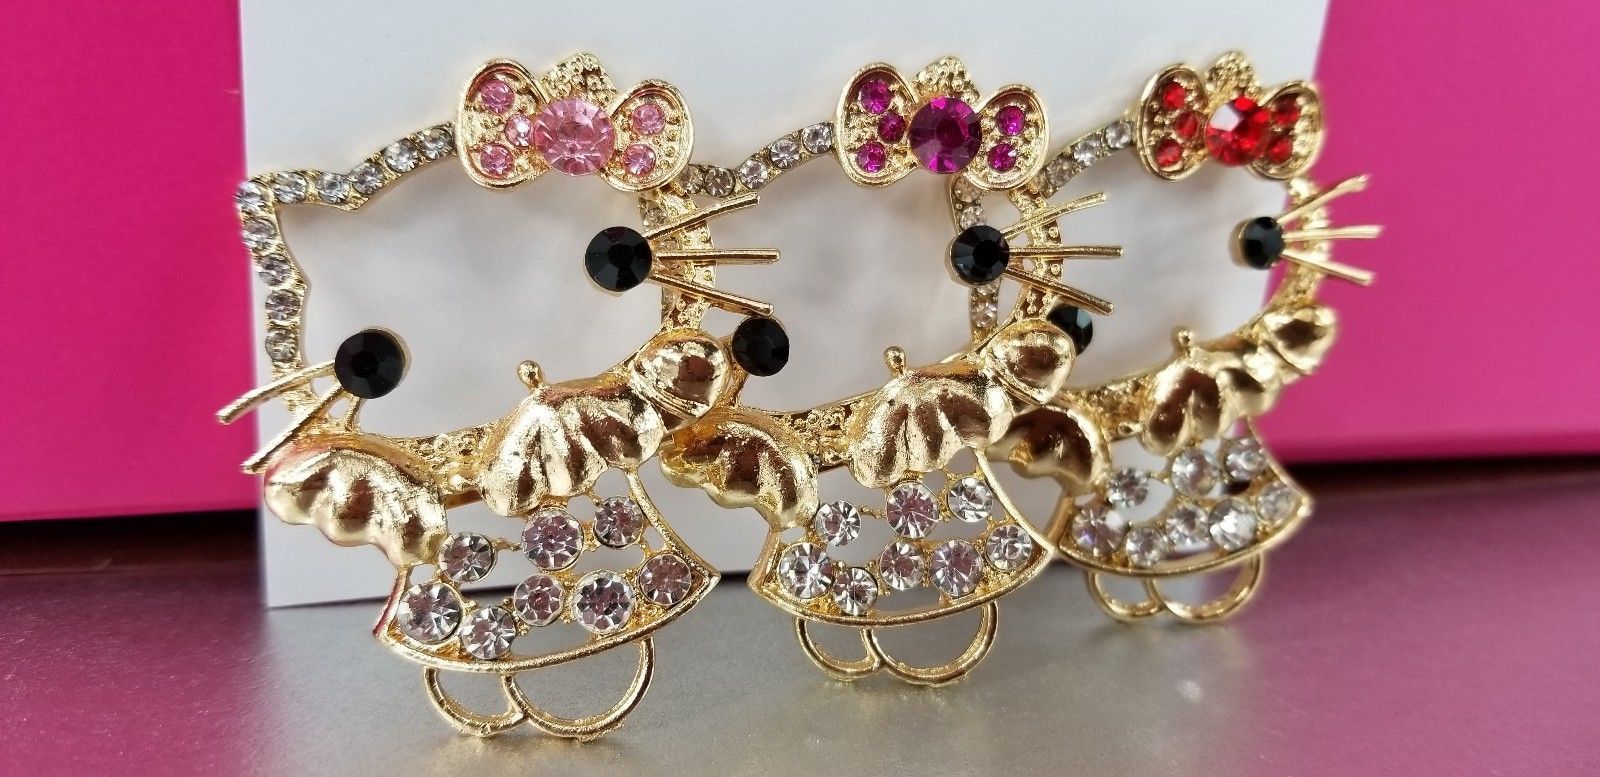 Hello Kitty Crystal Pins 3 colors to choose from Free Standard Shipping - $6.00